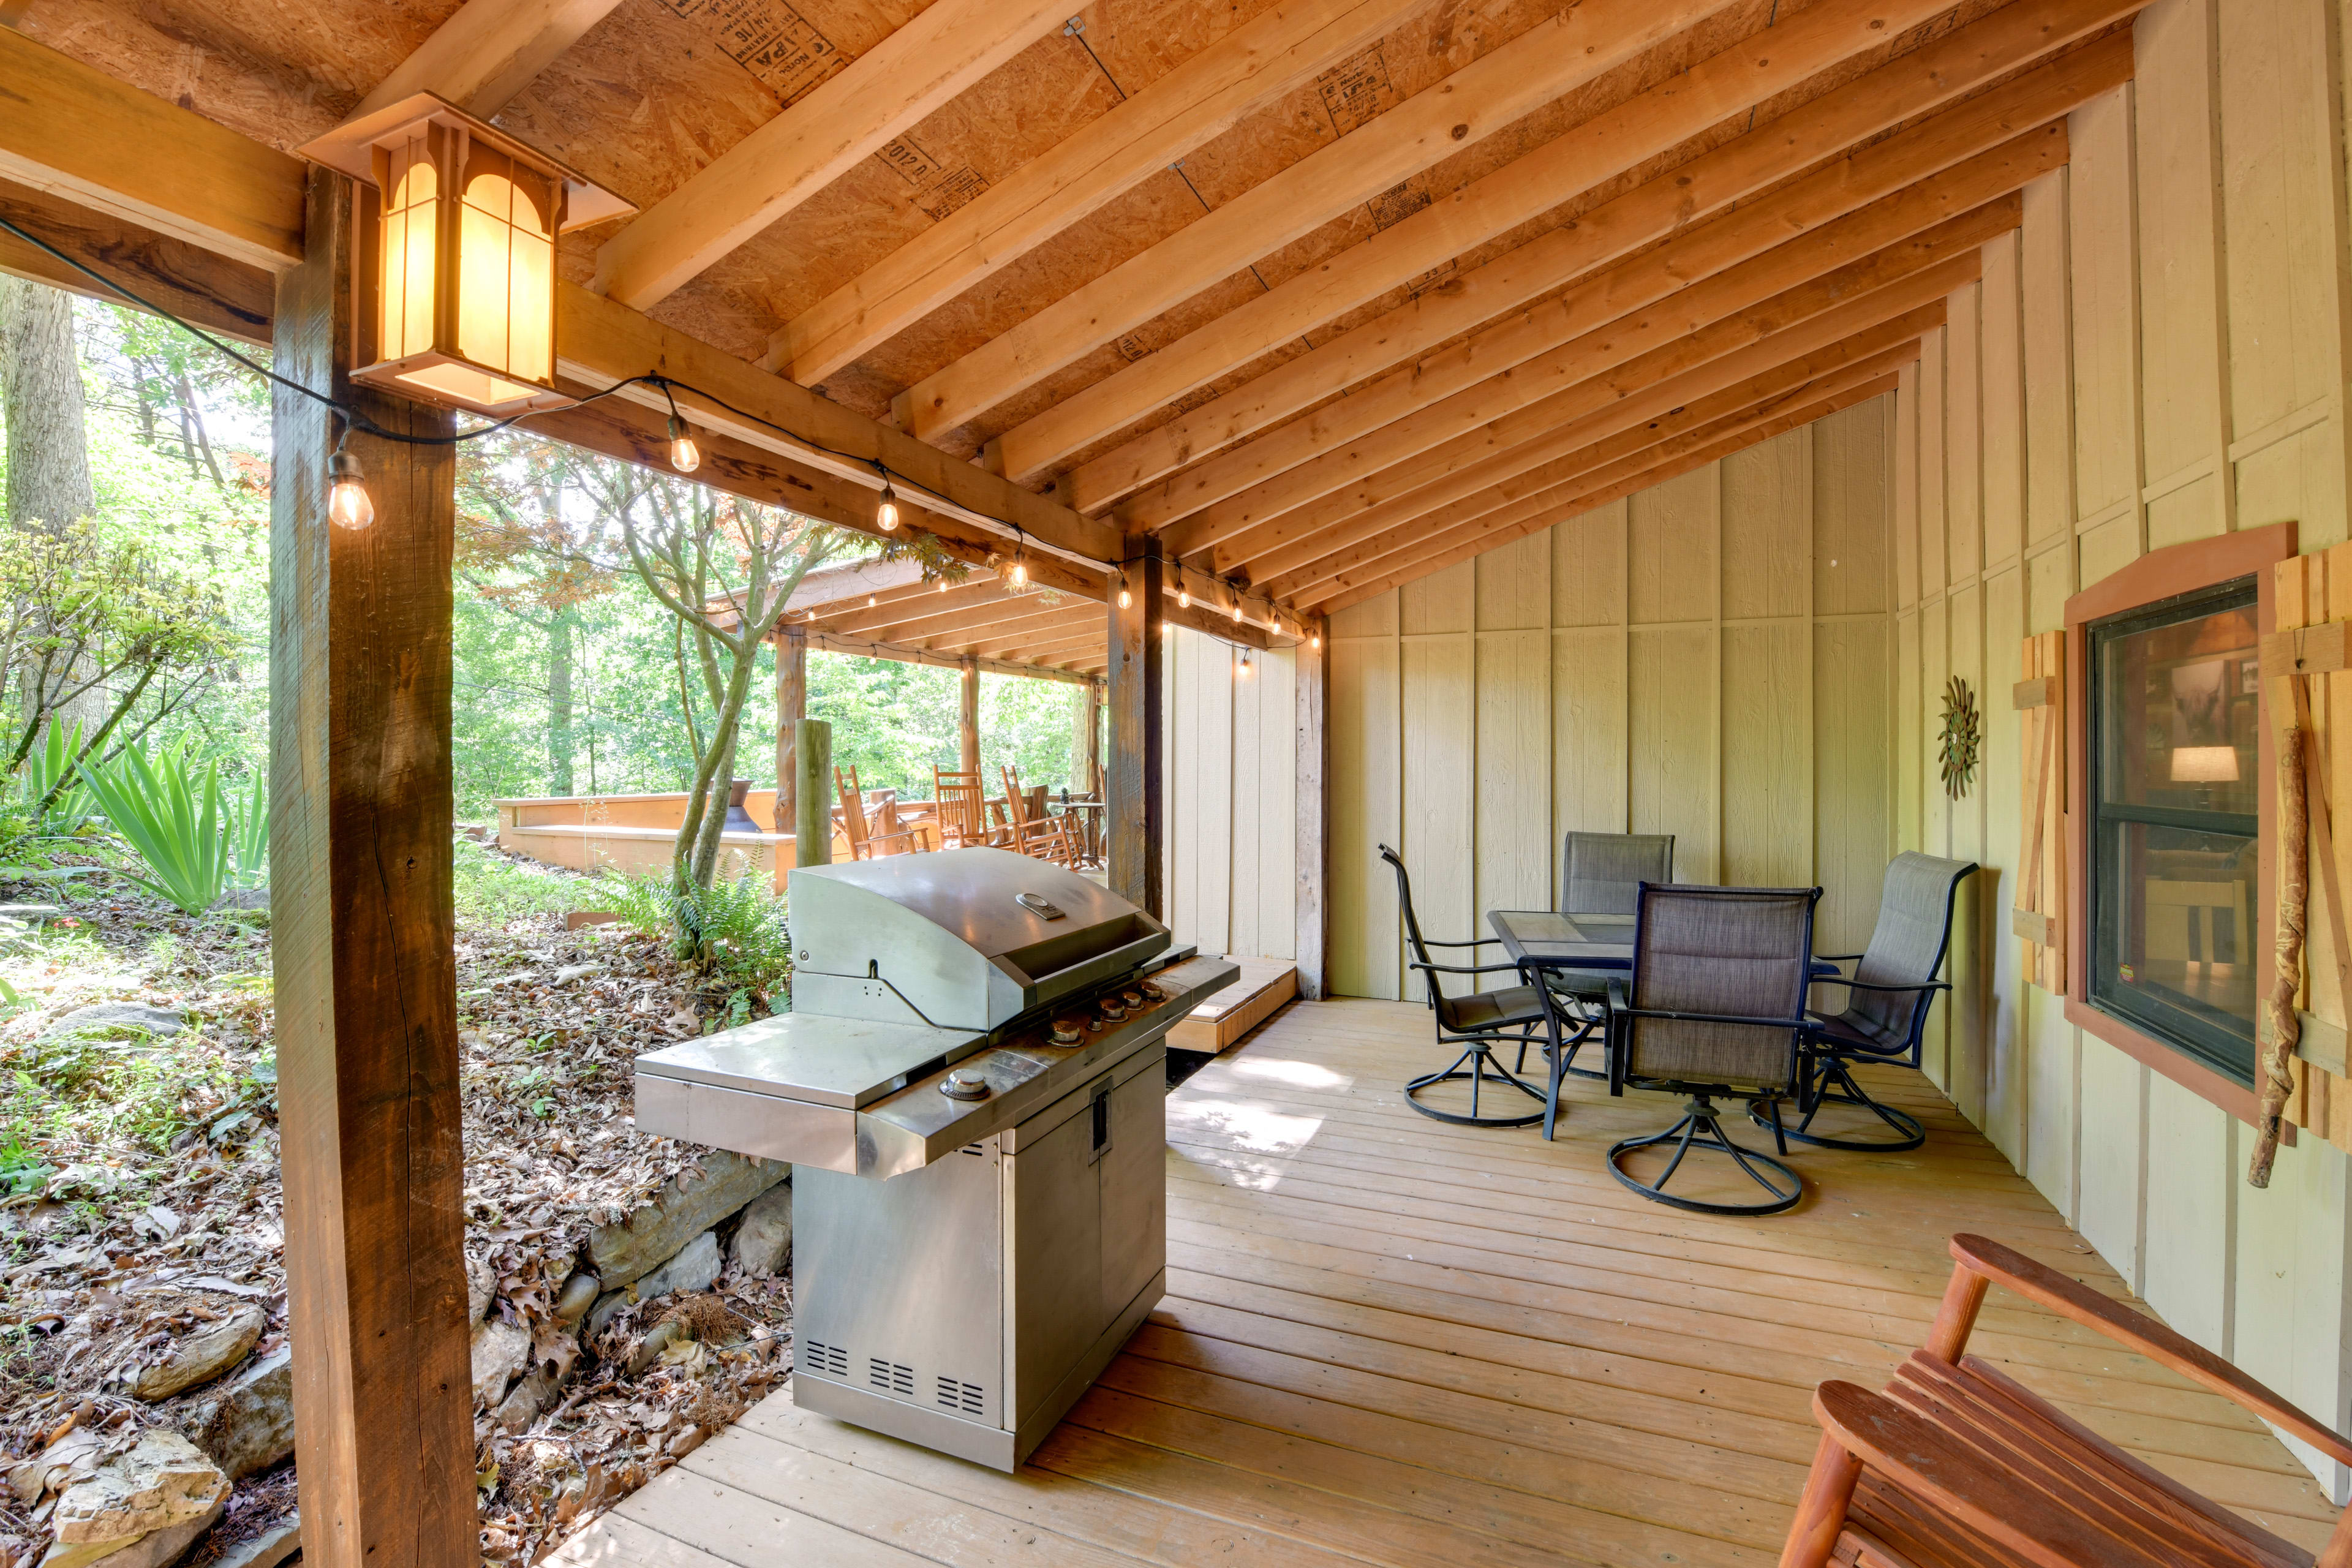 Covered Deck | Gas Grill | Outdoor Dining Table